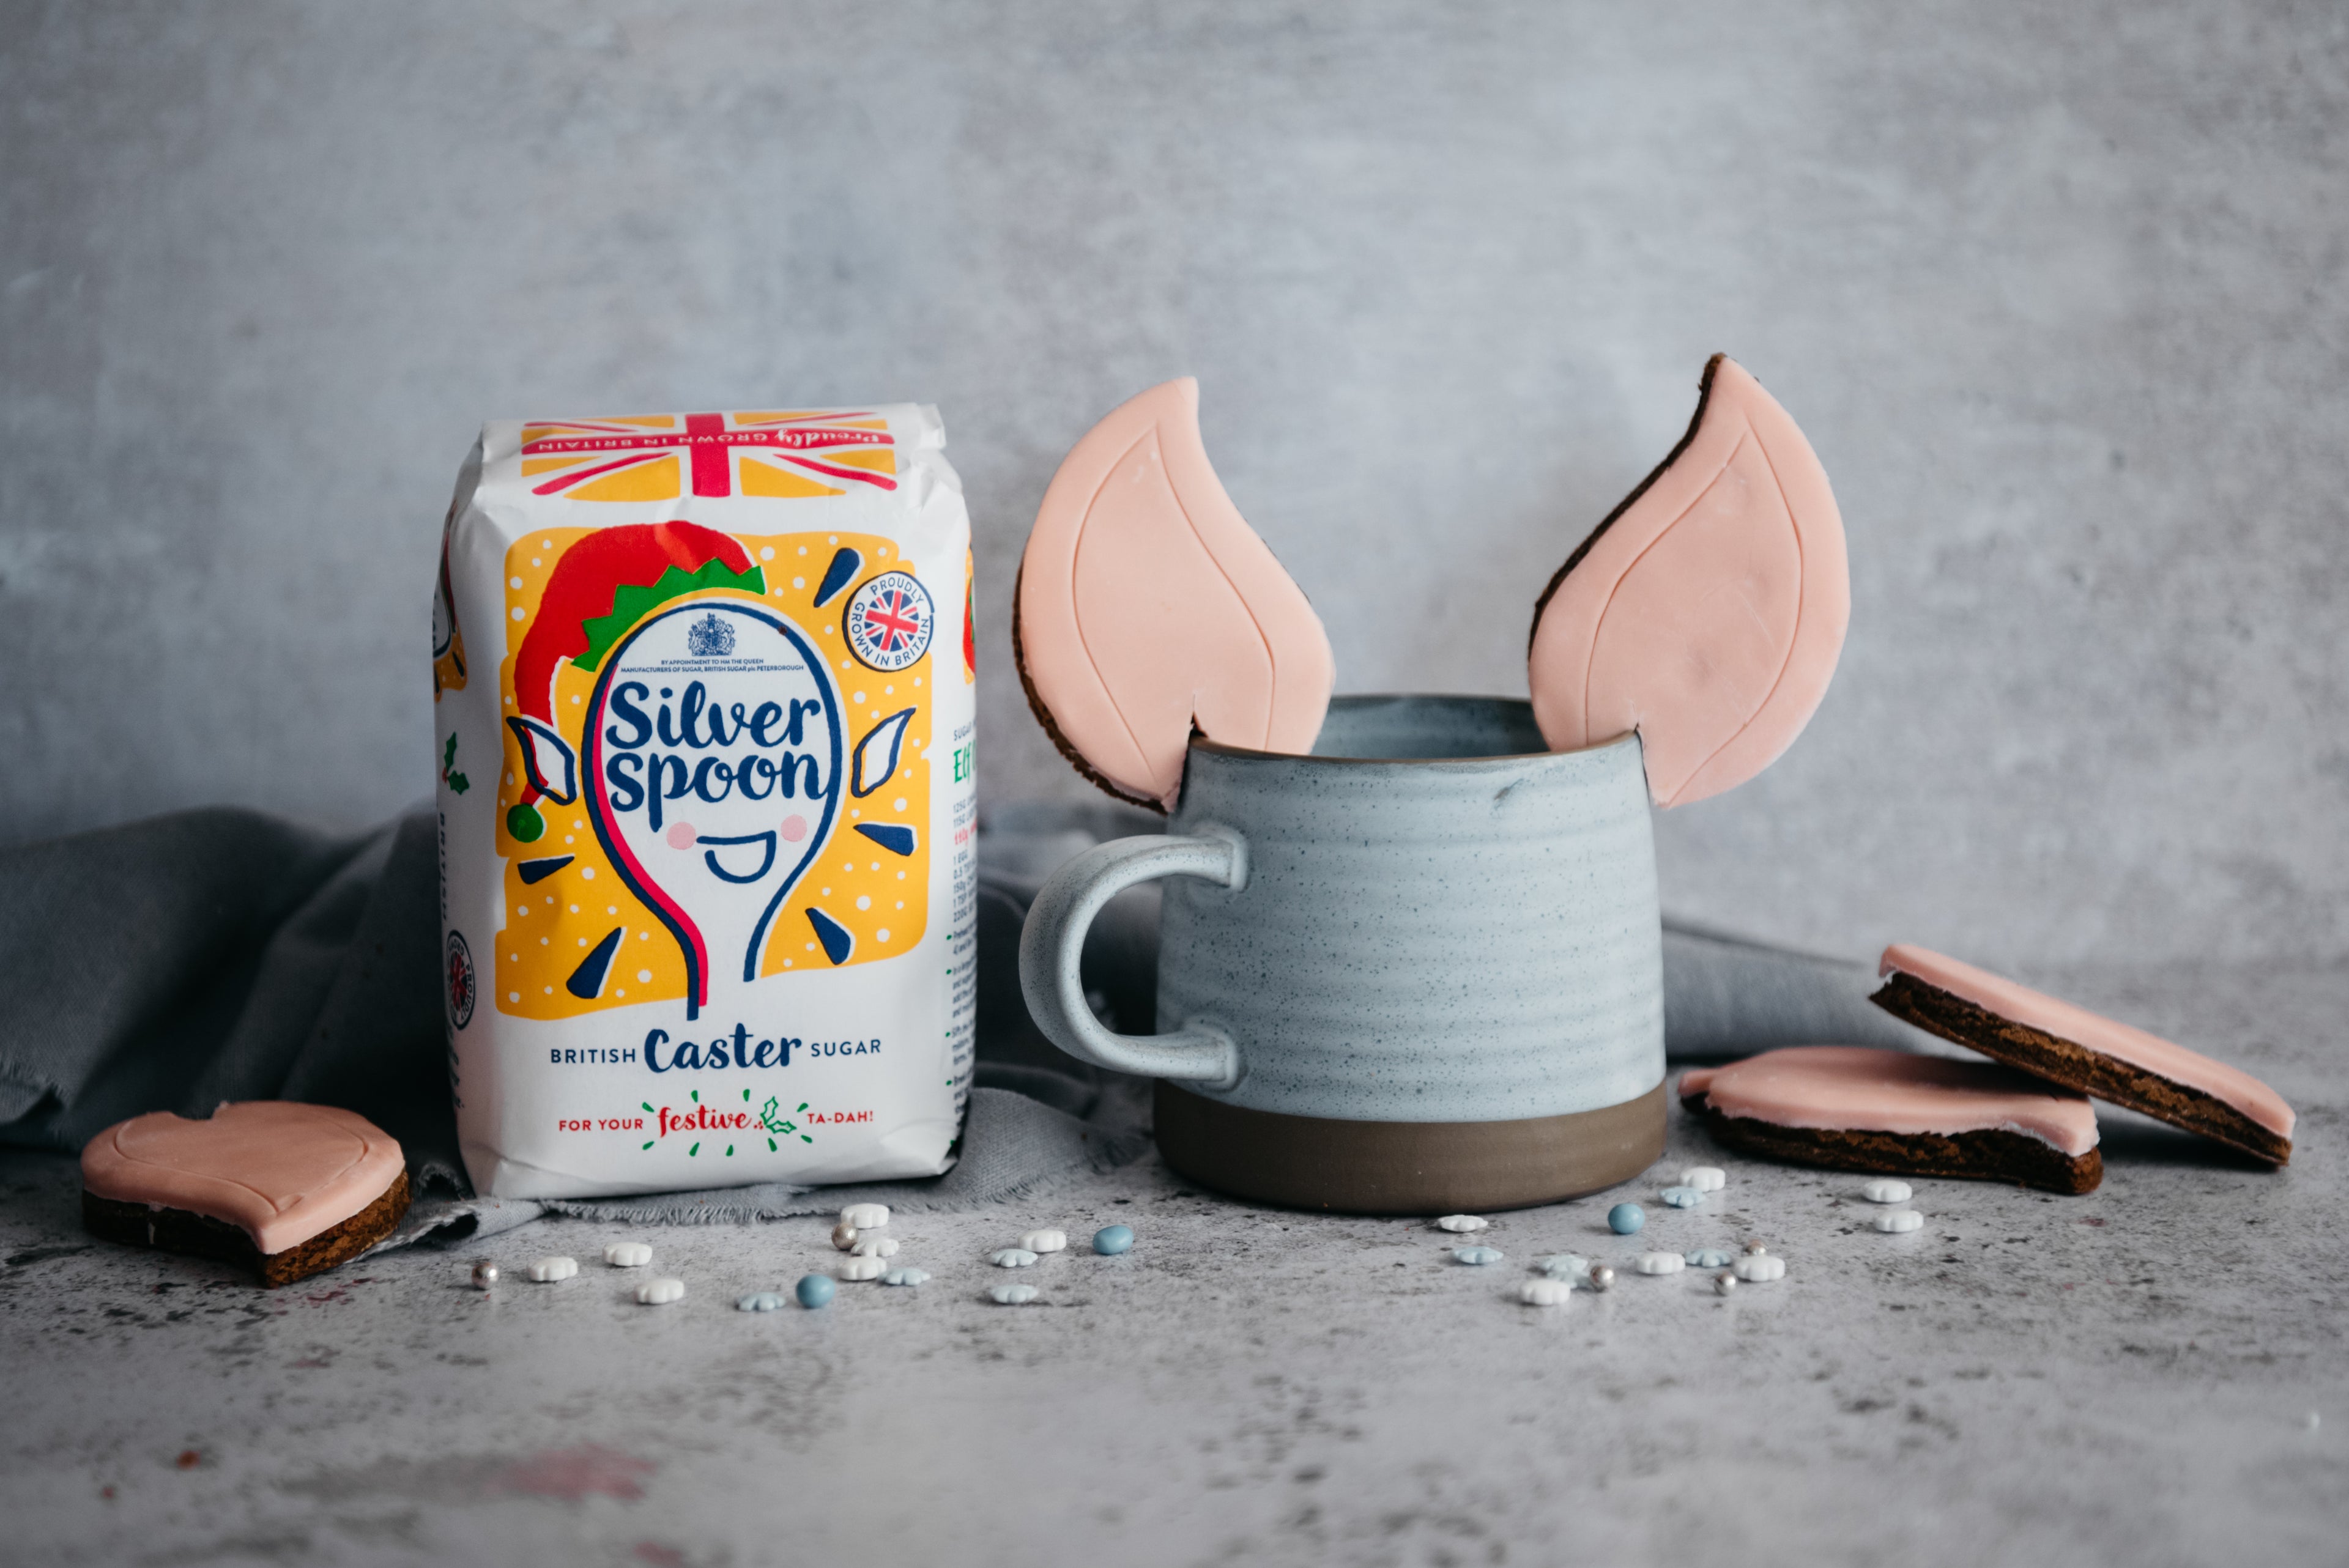 Elf Ears Gingerbread Cookies on the edge of a blue mug, next to a bag of Christmas edition packaging silver spoon caster sugar